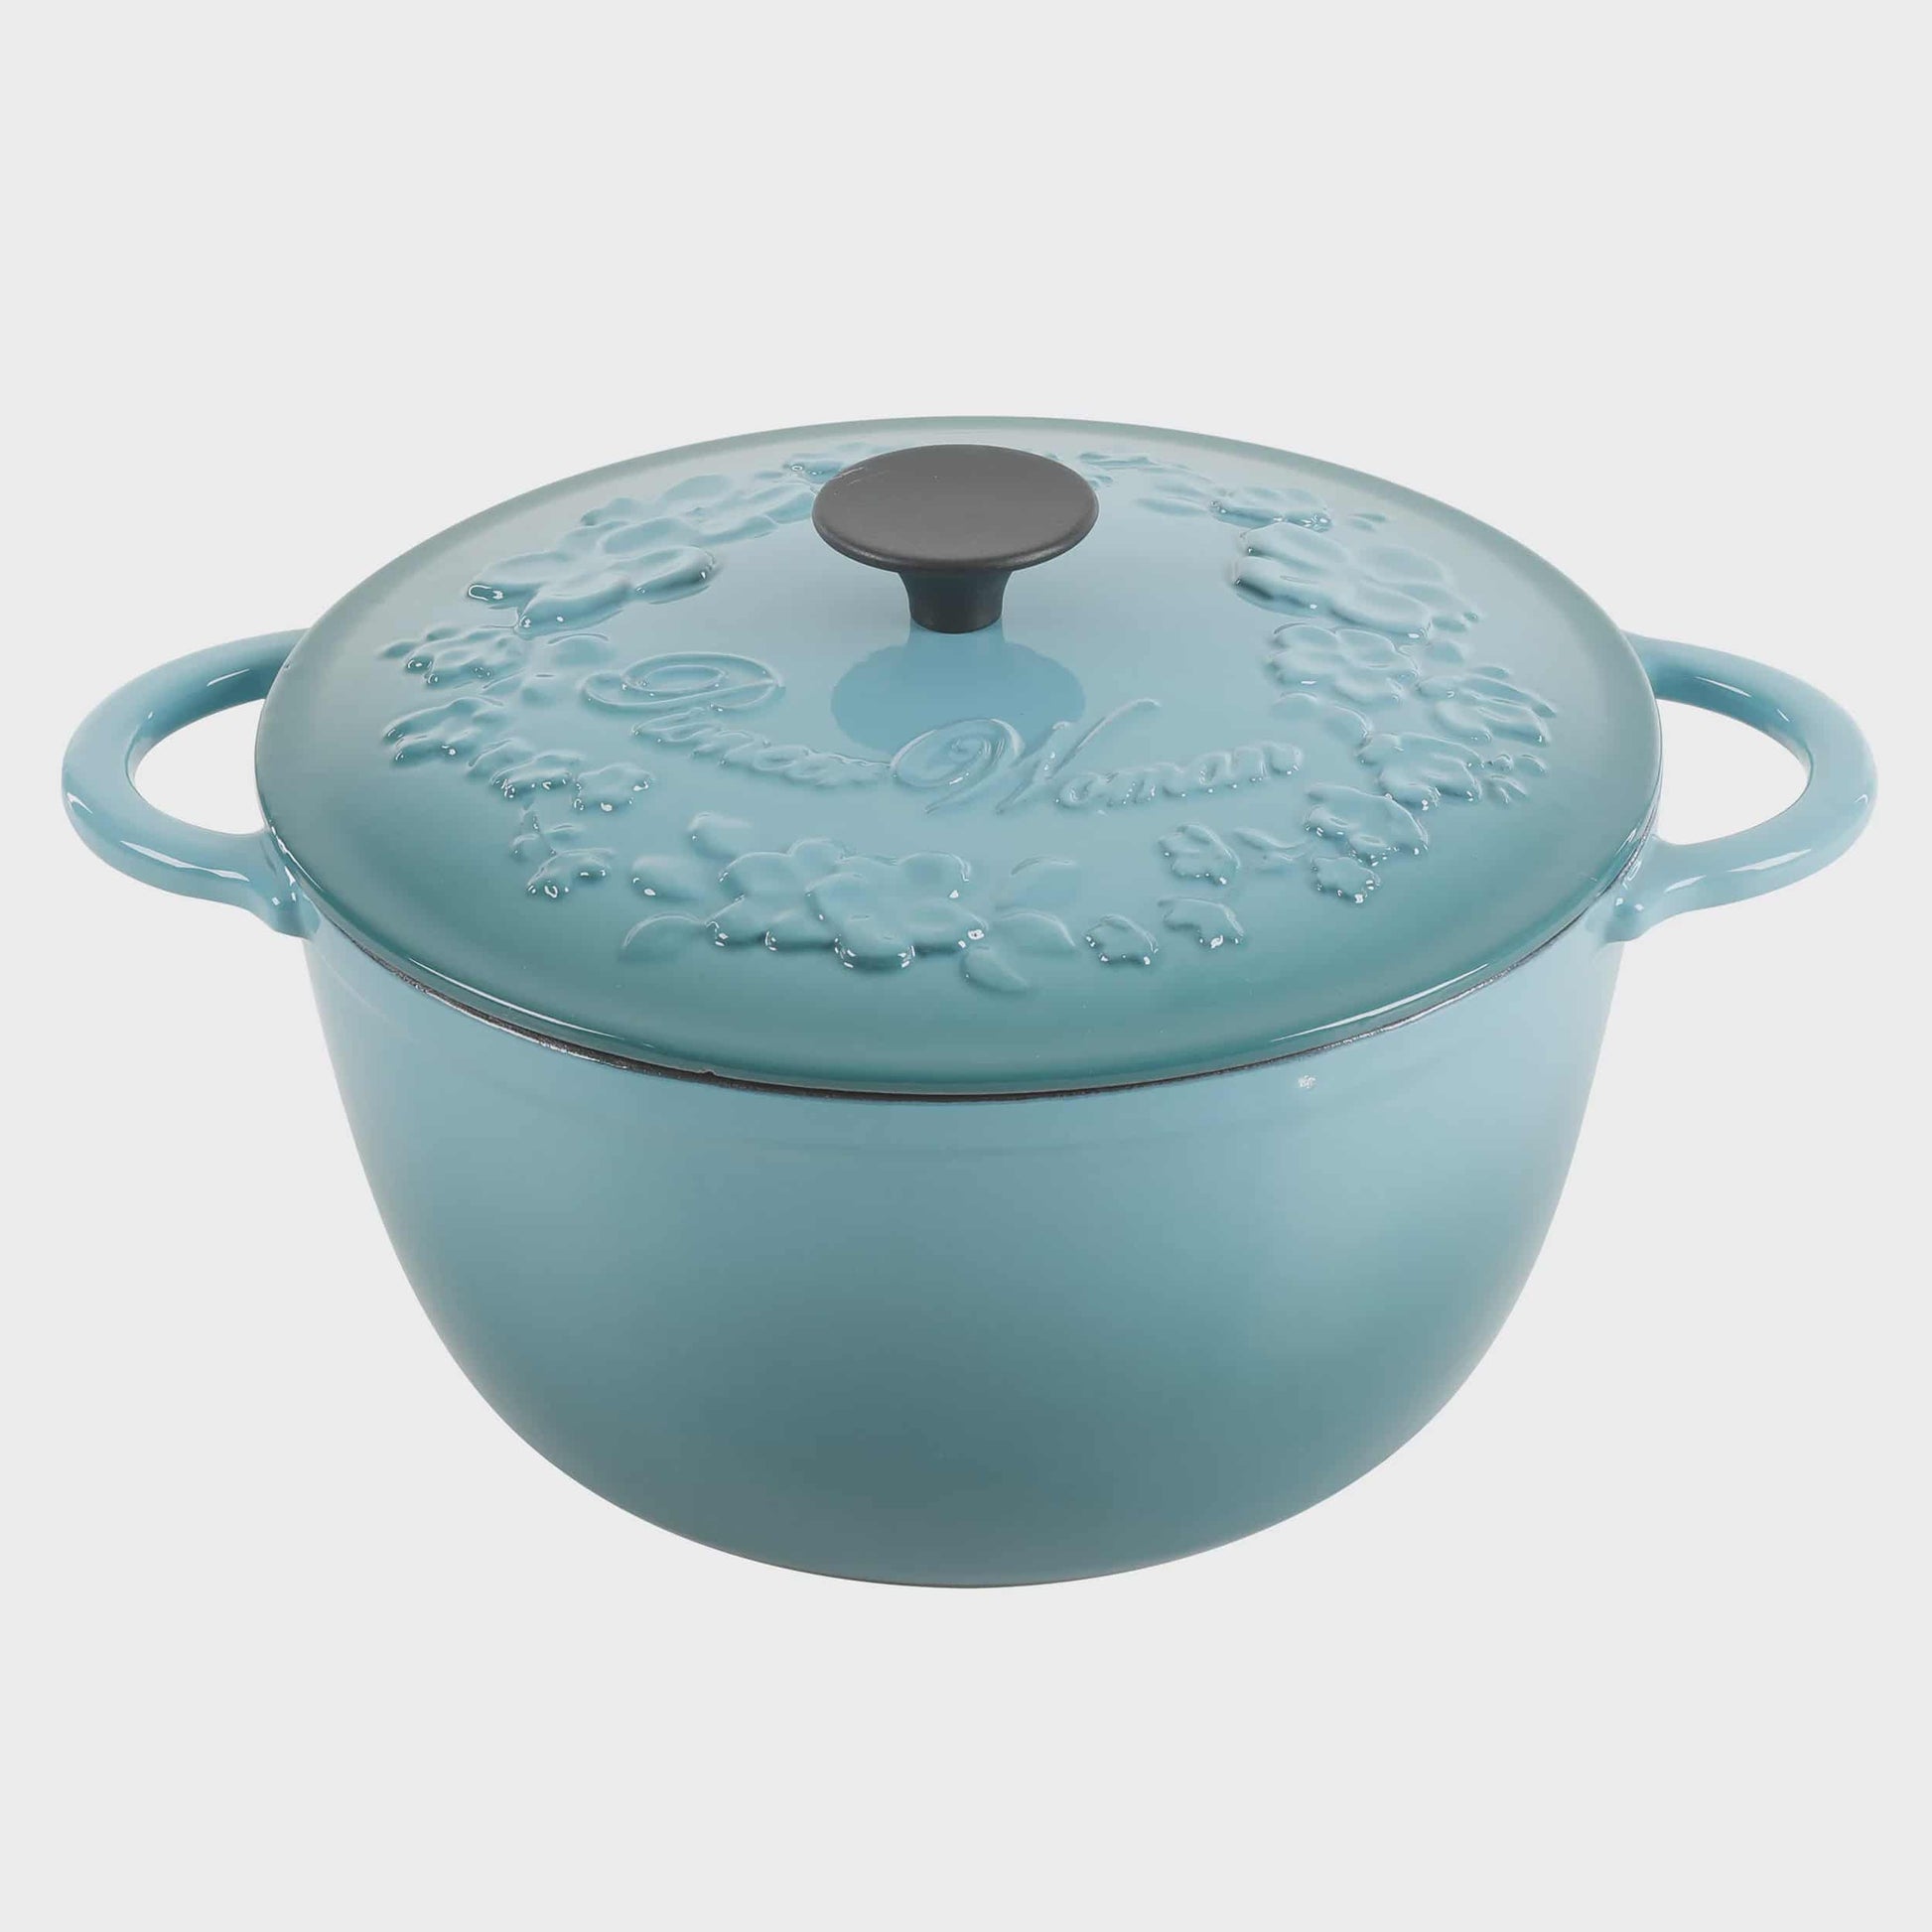 THE PIONEER WOMAN (REE DRUMMOND) BREEZY BLOSSOM DUTCH OVEN 4 QUART